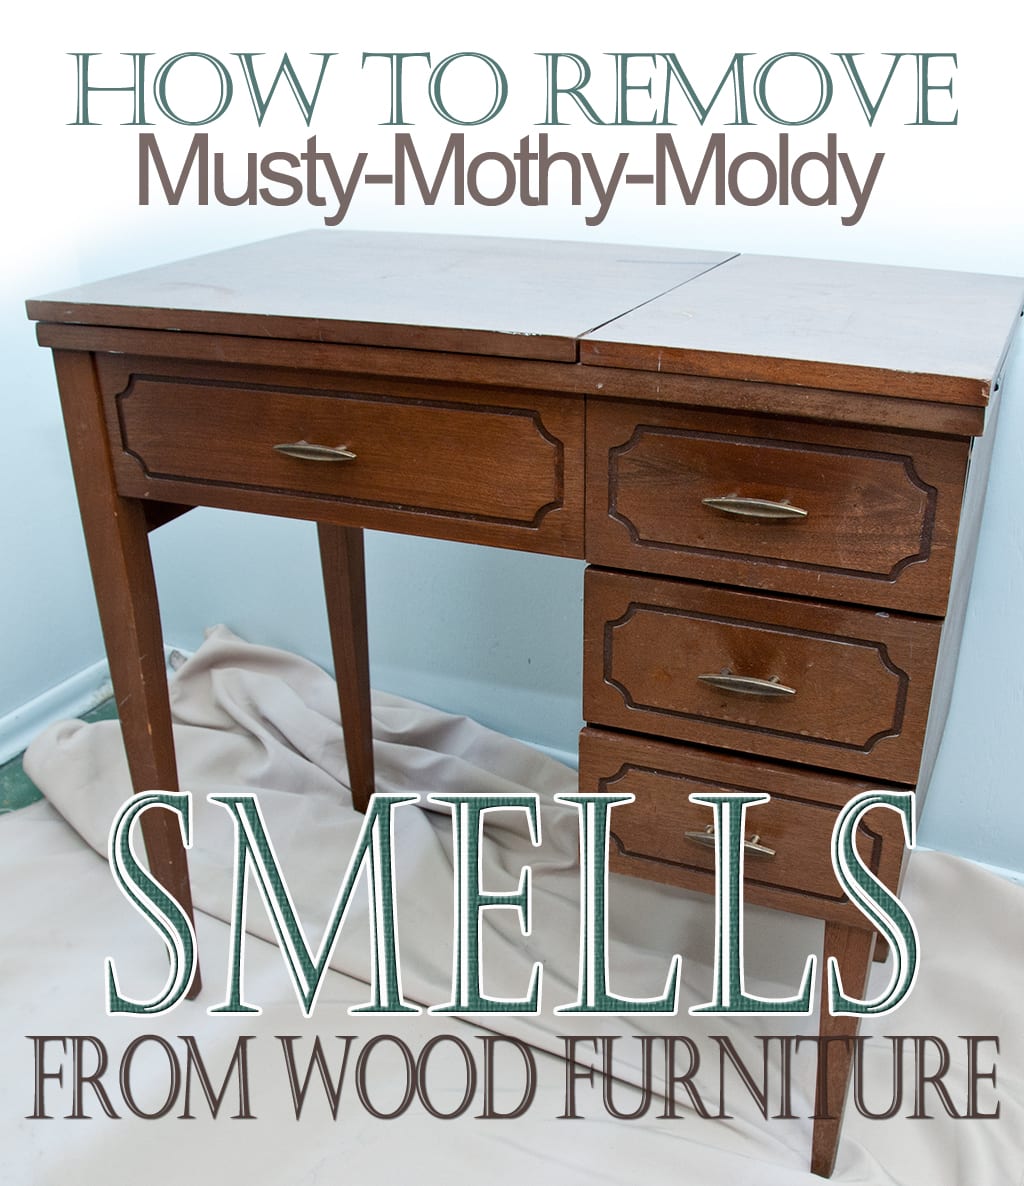 wood furniture musty remove rid wooden moldy smell smells drawers cleaning mothy clean salvagedinspirations odors damp getting smelling painted clothes